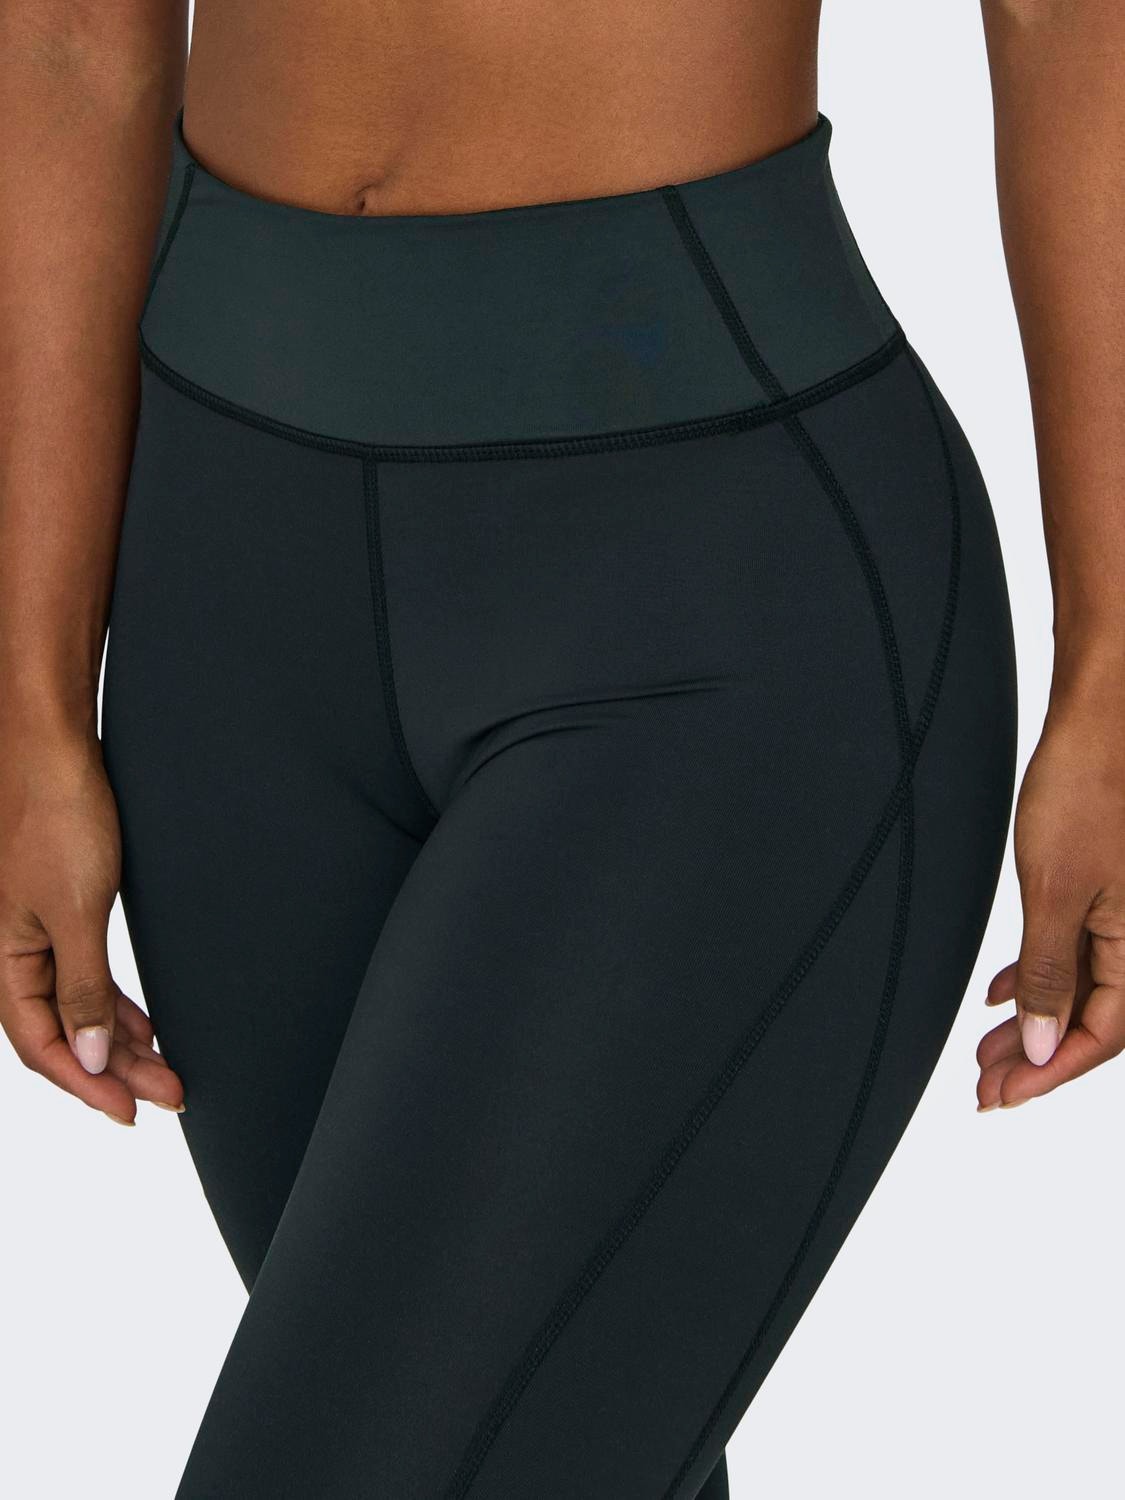 ONLY Tight Fit High waist Leggings -Black - 15287753